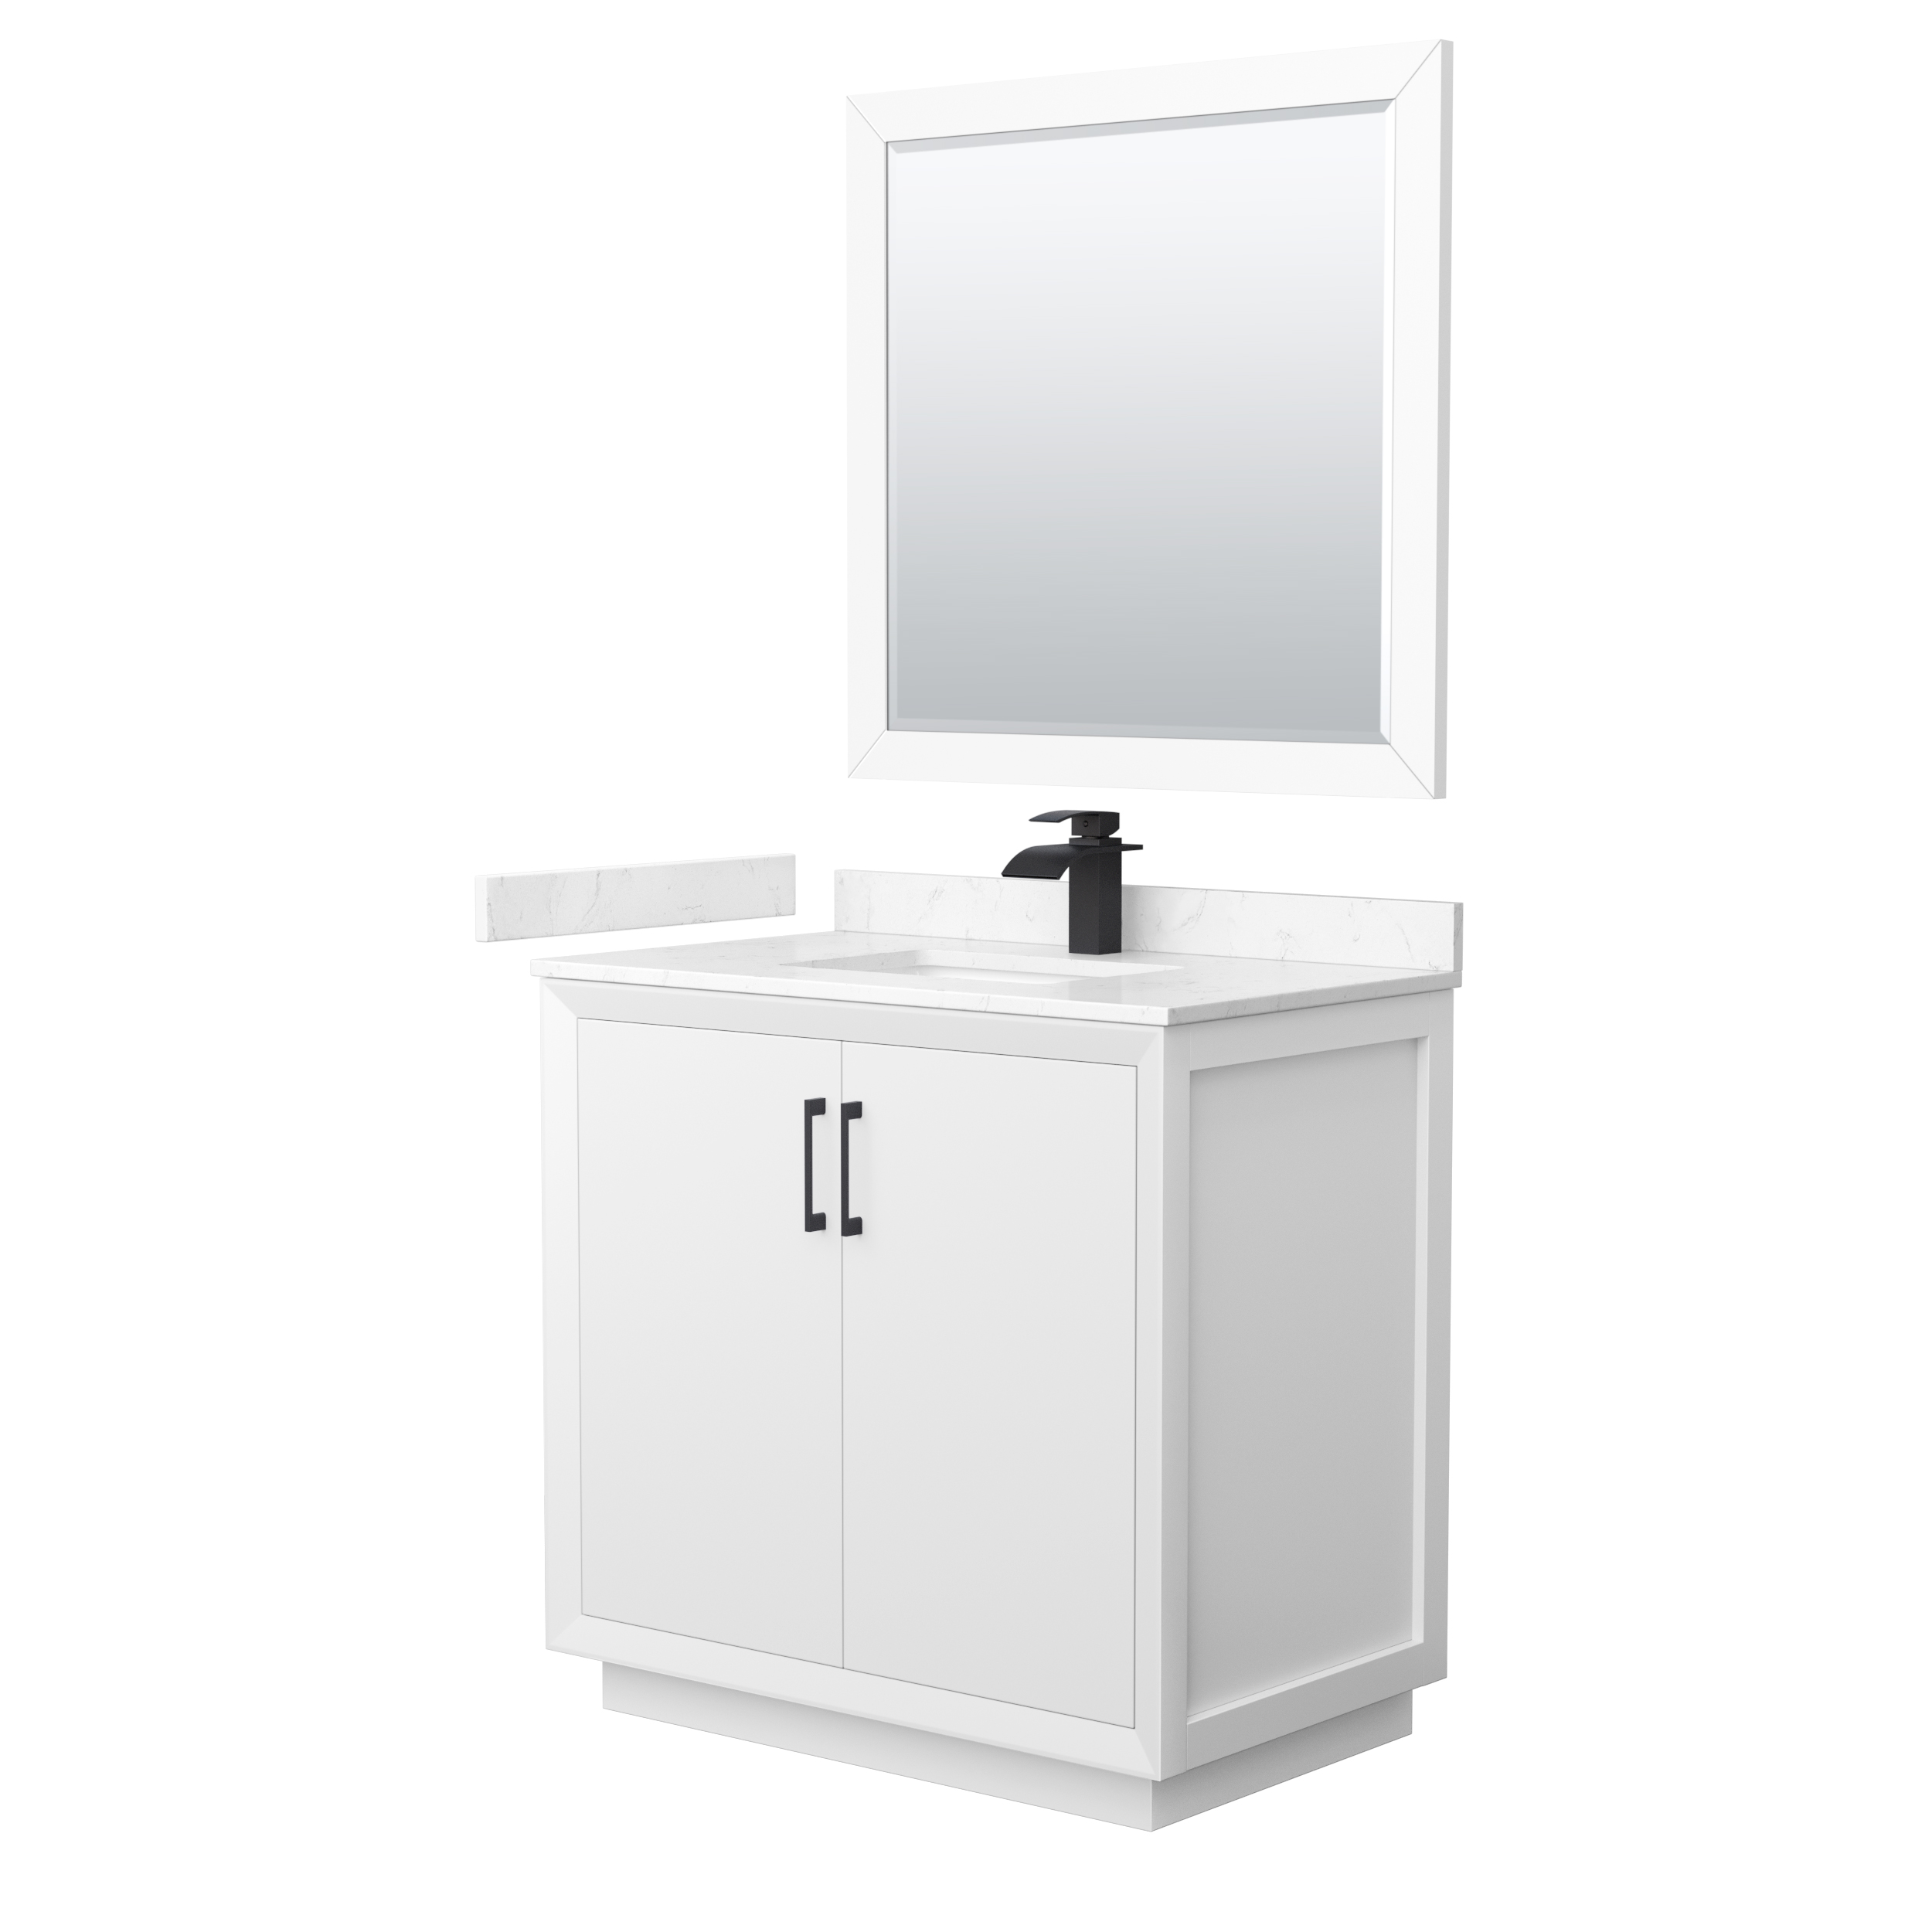 Strada 36" Single Vanity with optional Cultured Marble Counter - White WC-4141-36-SGL-VAN-WHT-